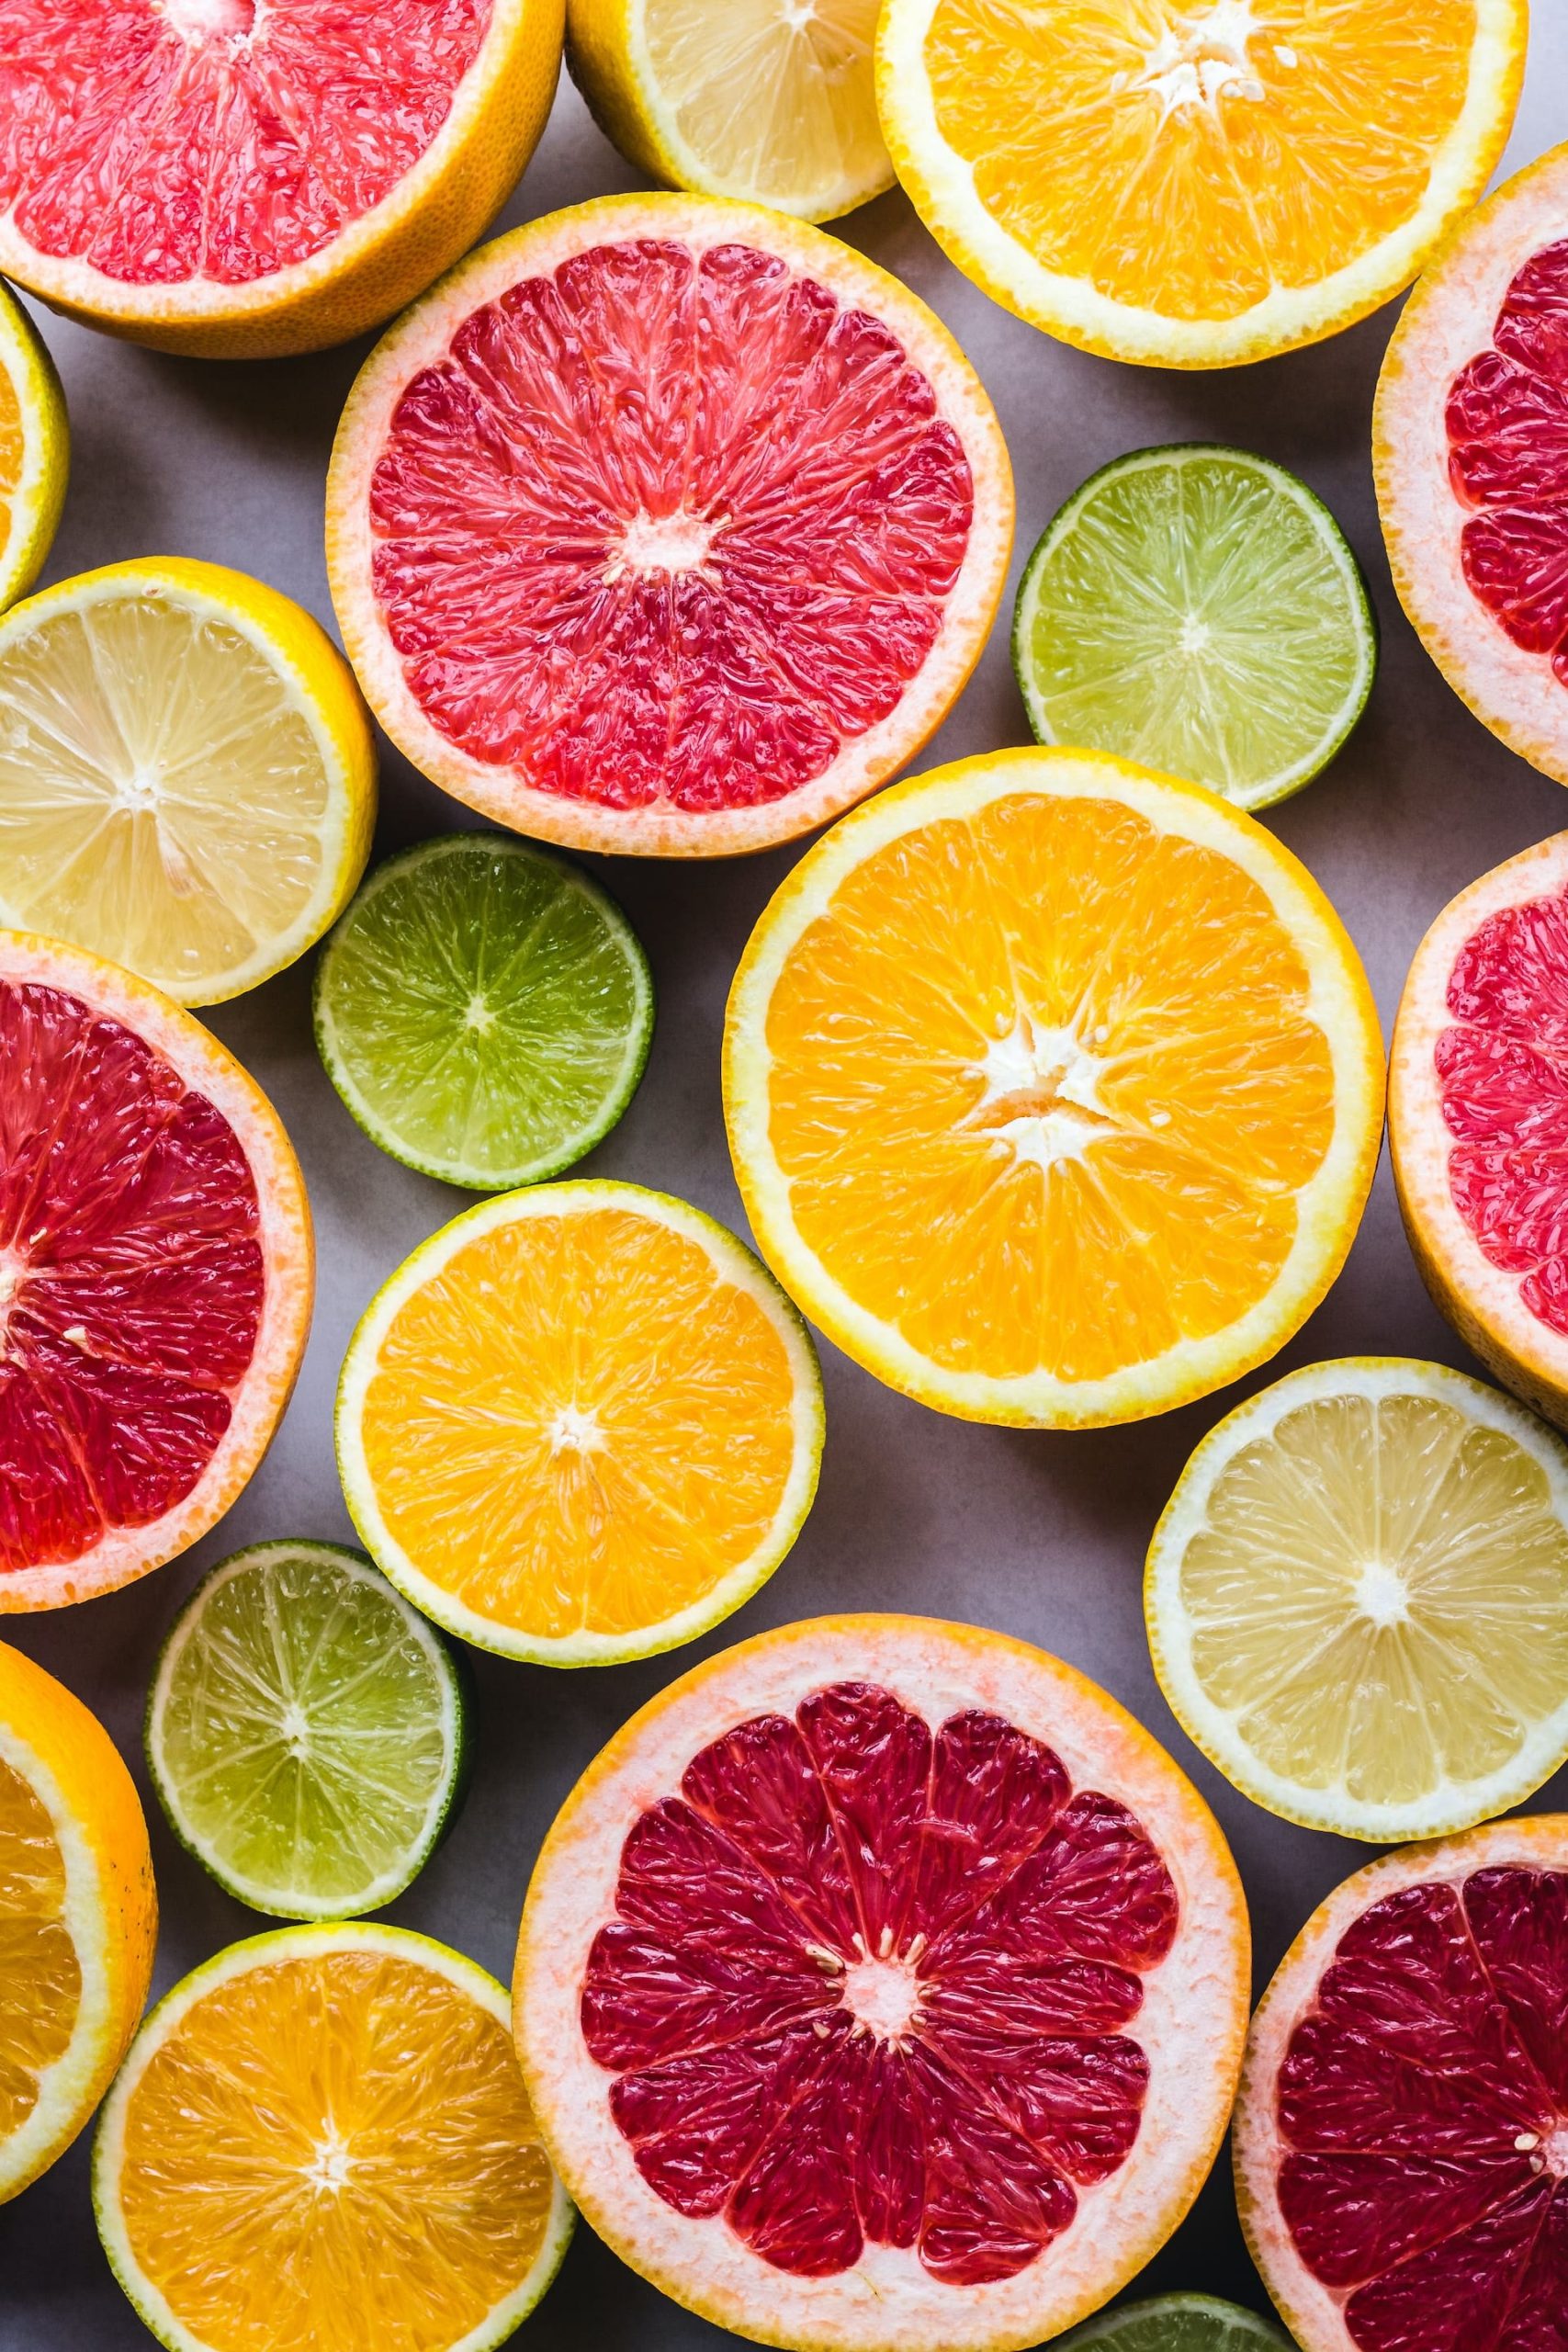 Citrus Bioflavonoids – Health Benefits – a Gift from Nature